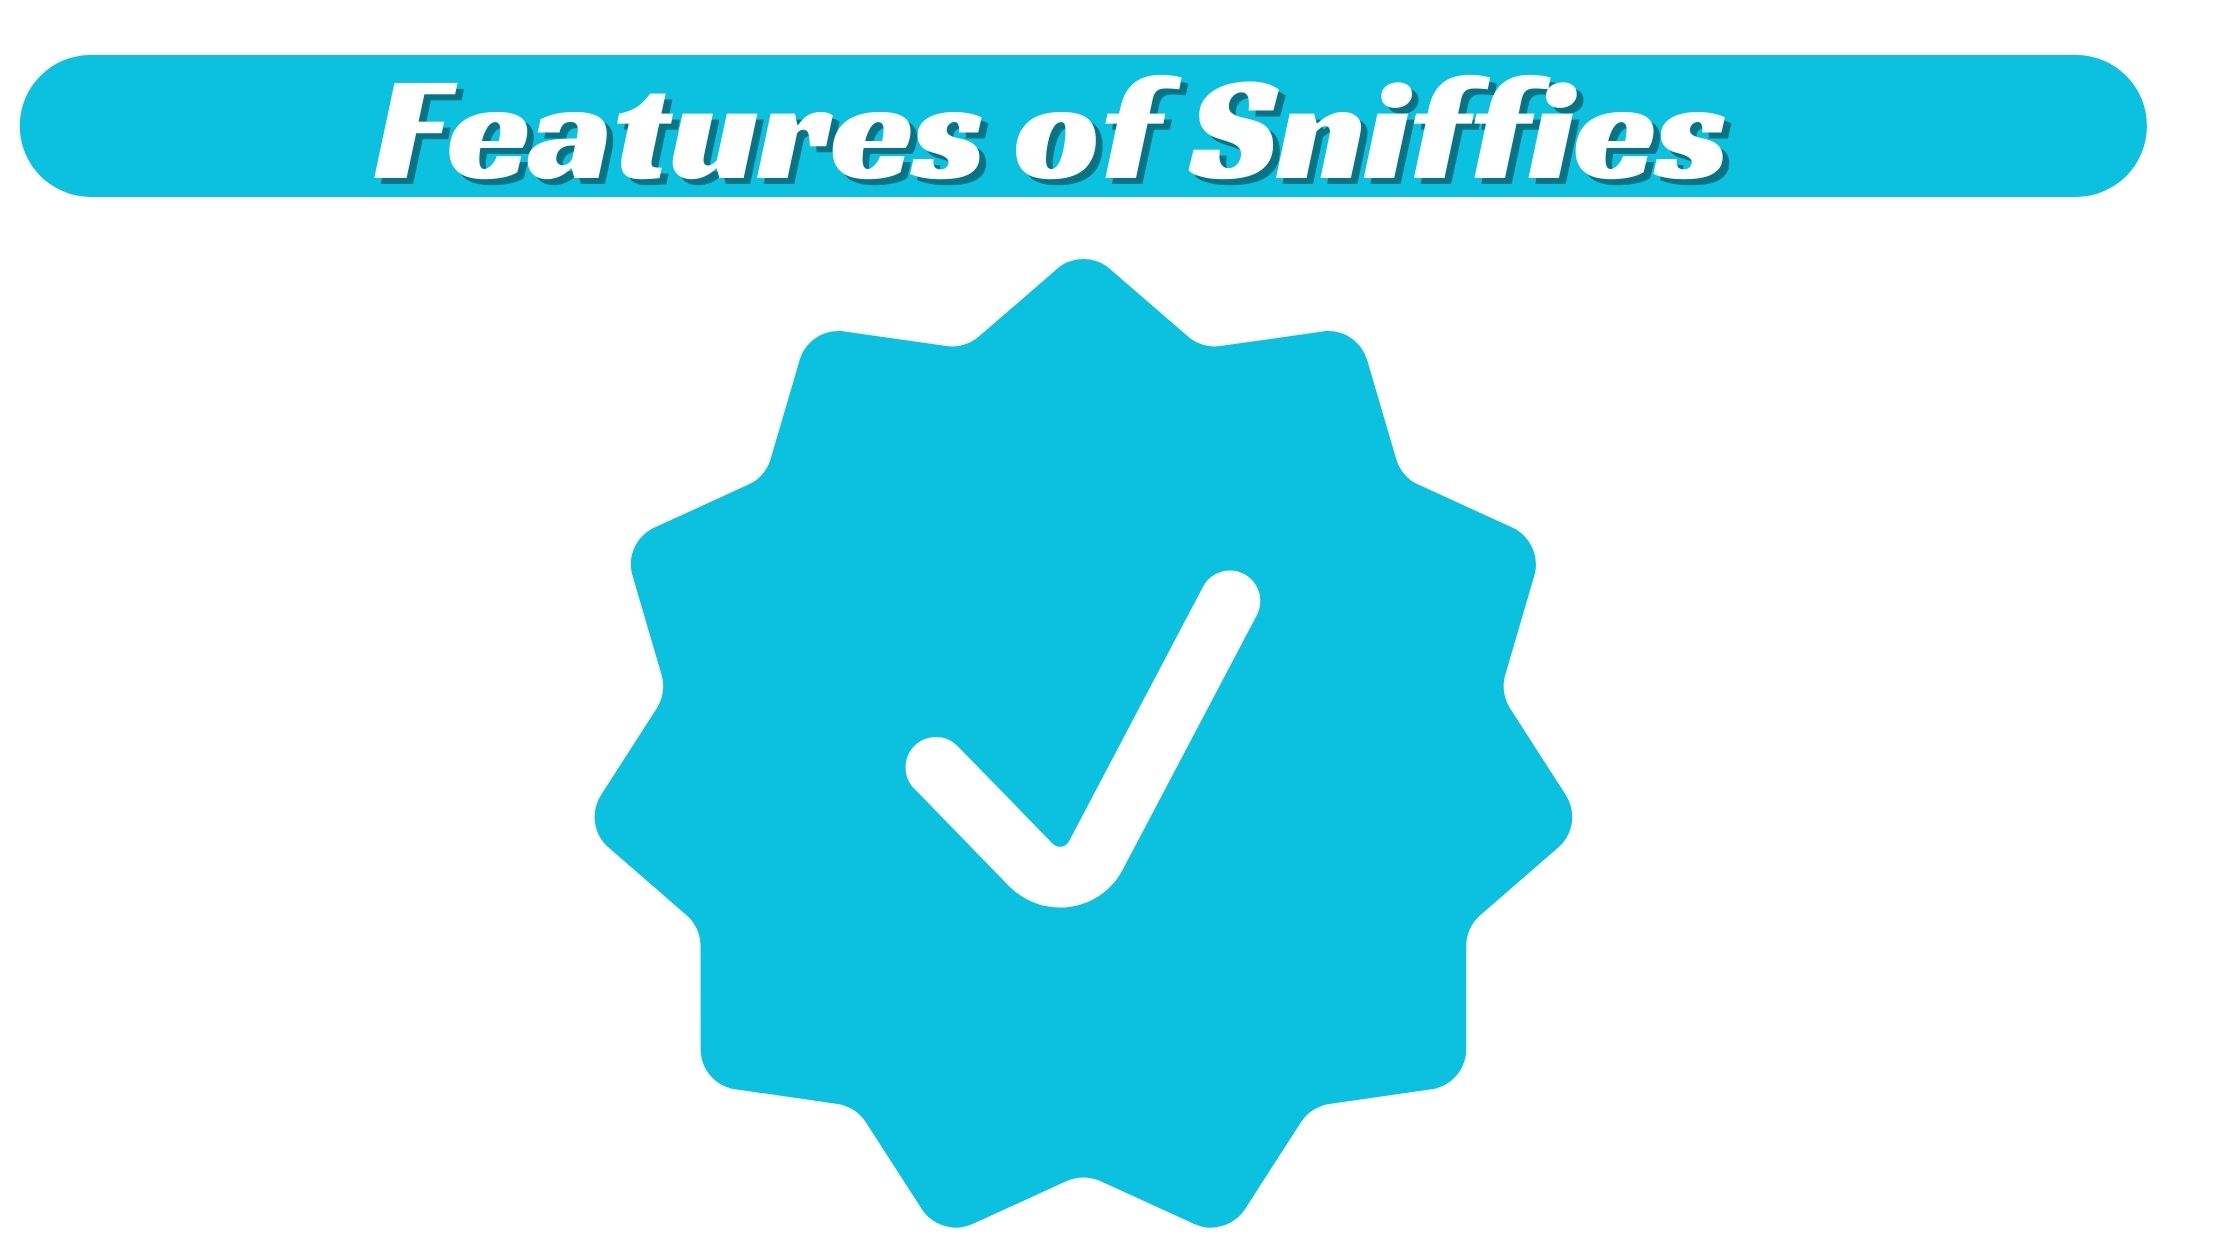 Features of Sniffies